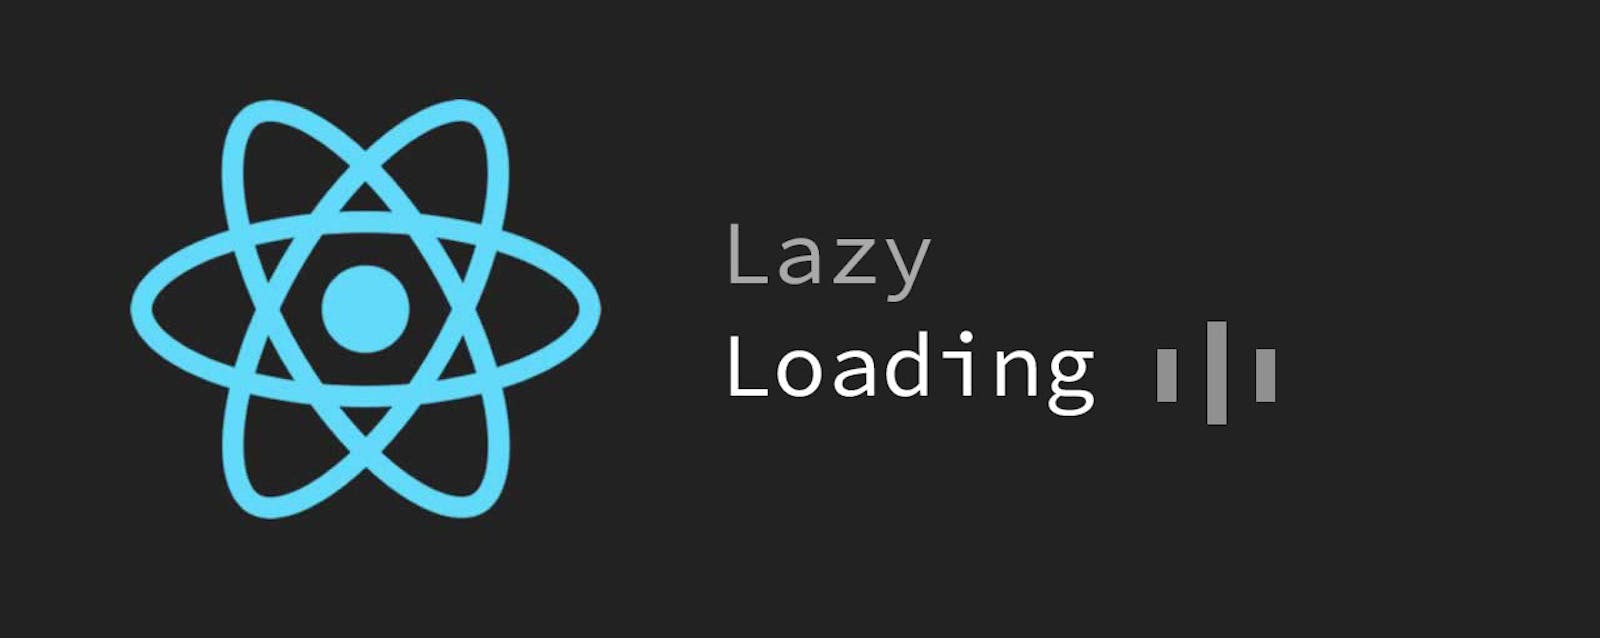 An Introduction to Lazy Loading (In React.js)